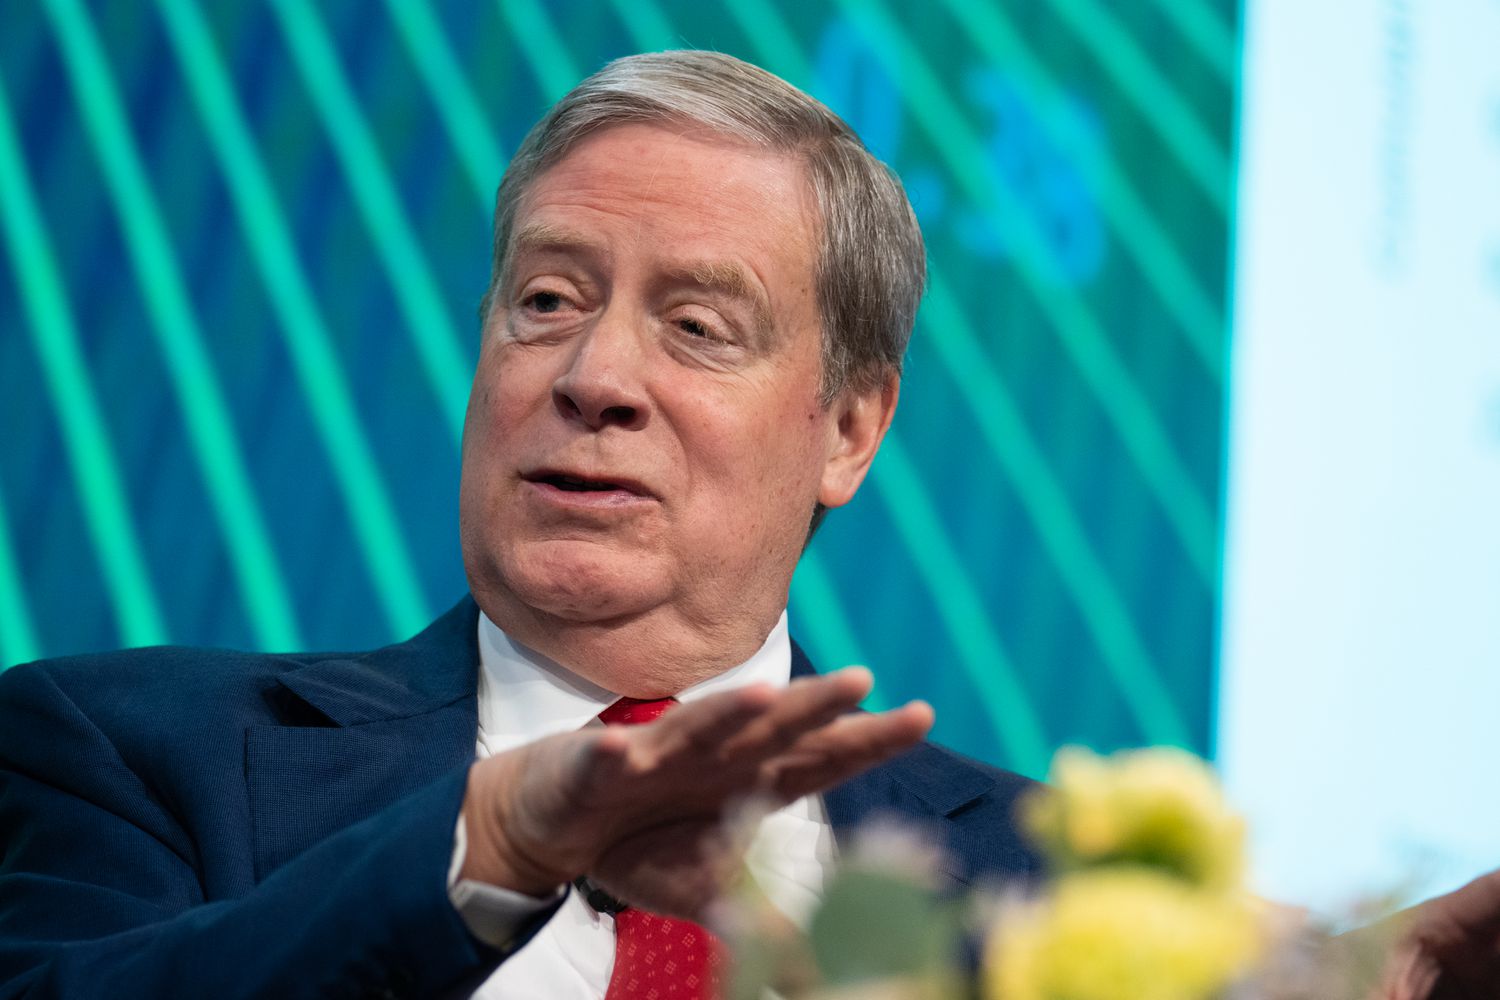 Stanley Druckenmiller Bet On Biotech, Financial Services in Q1, Trimmed Nvidia Stake [Video]